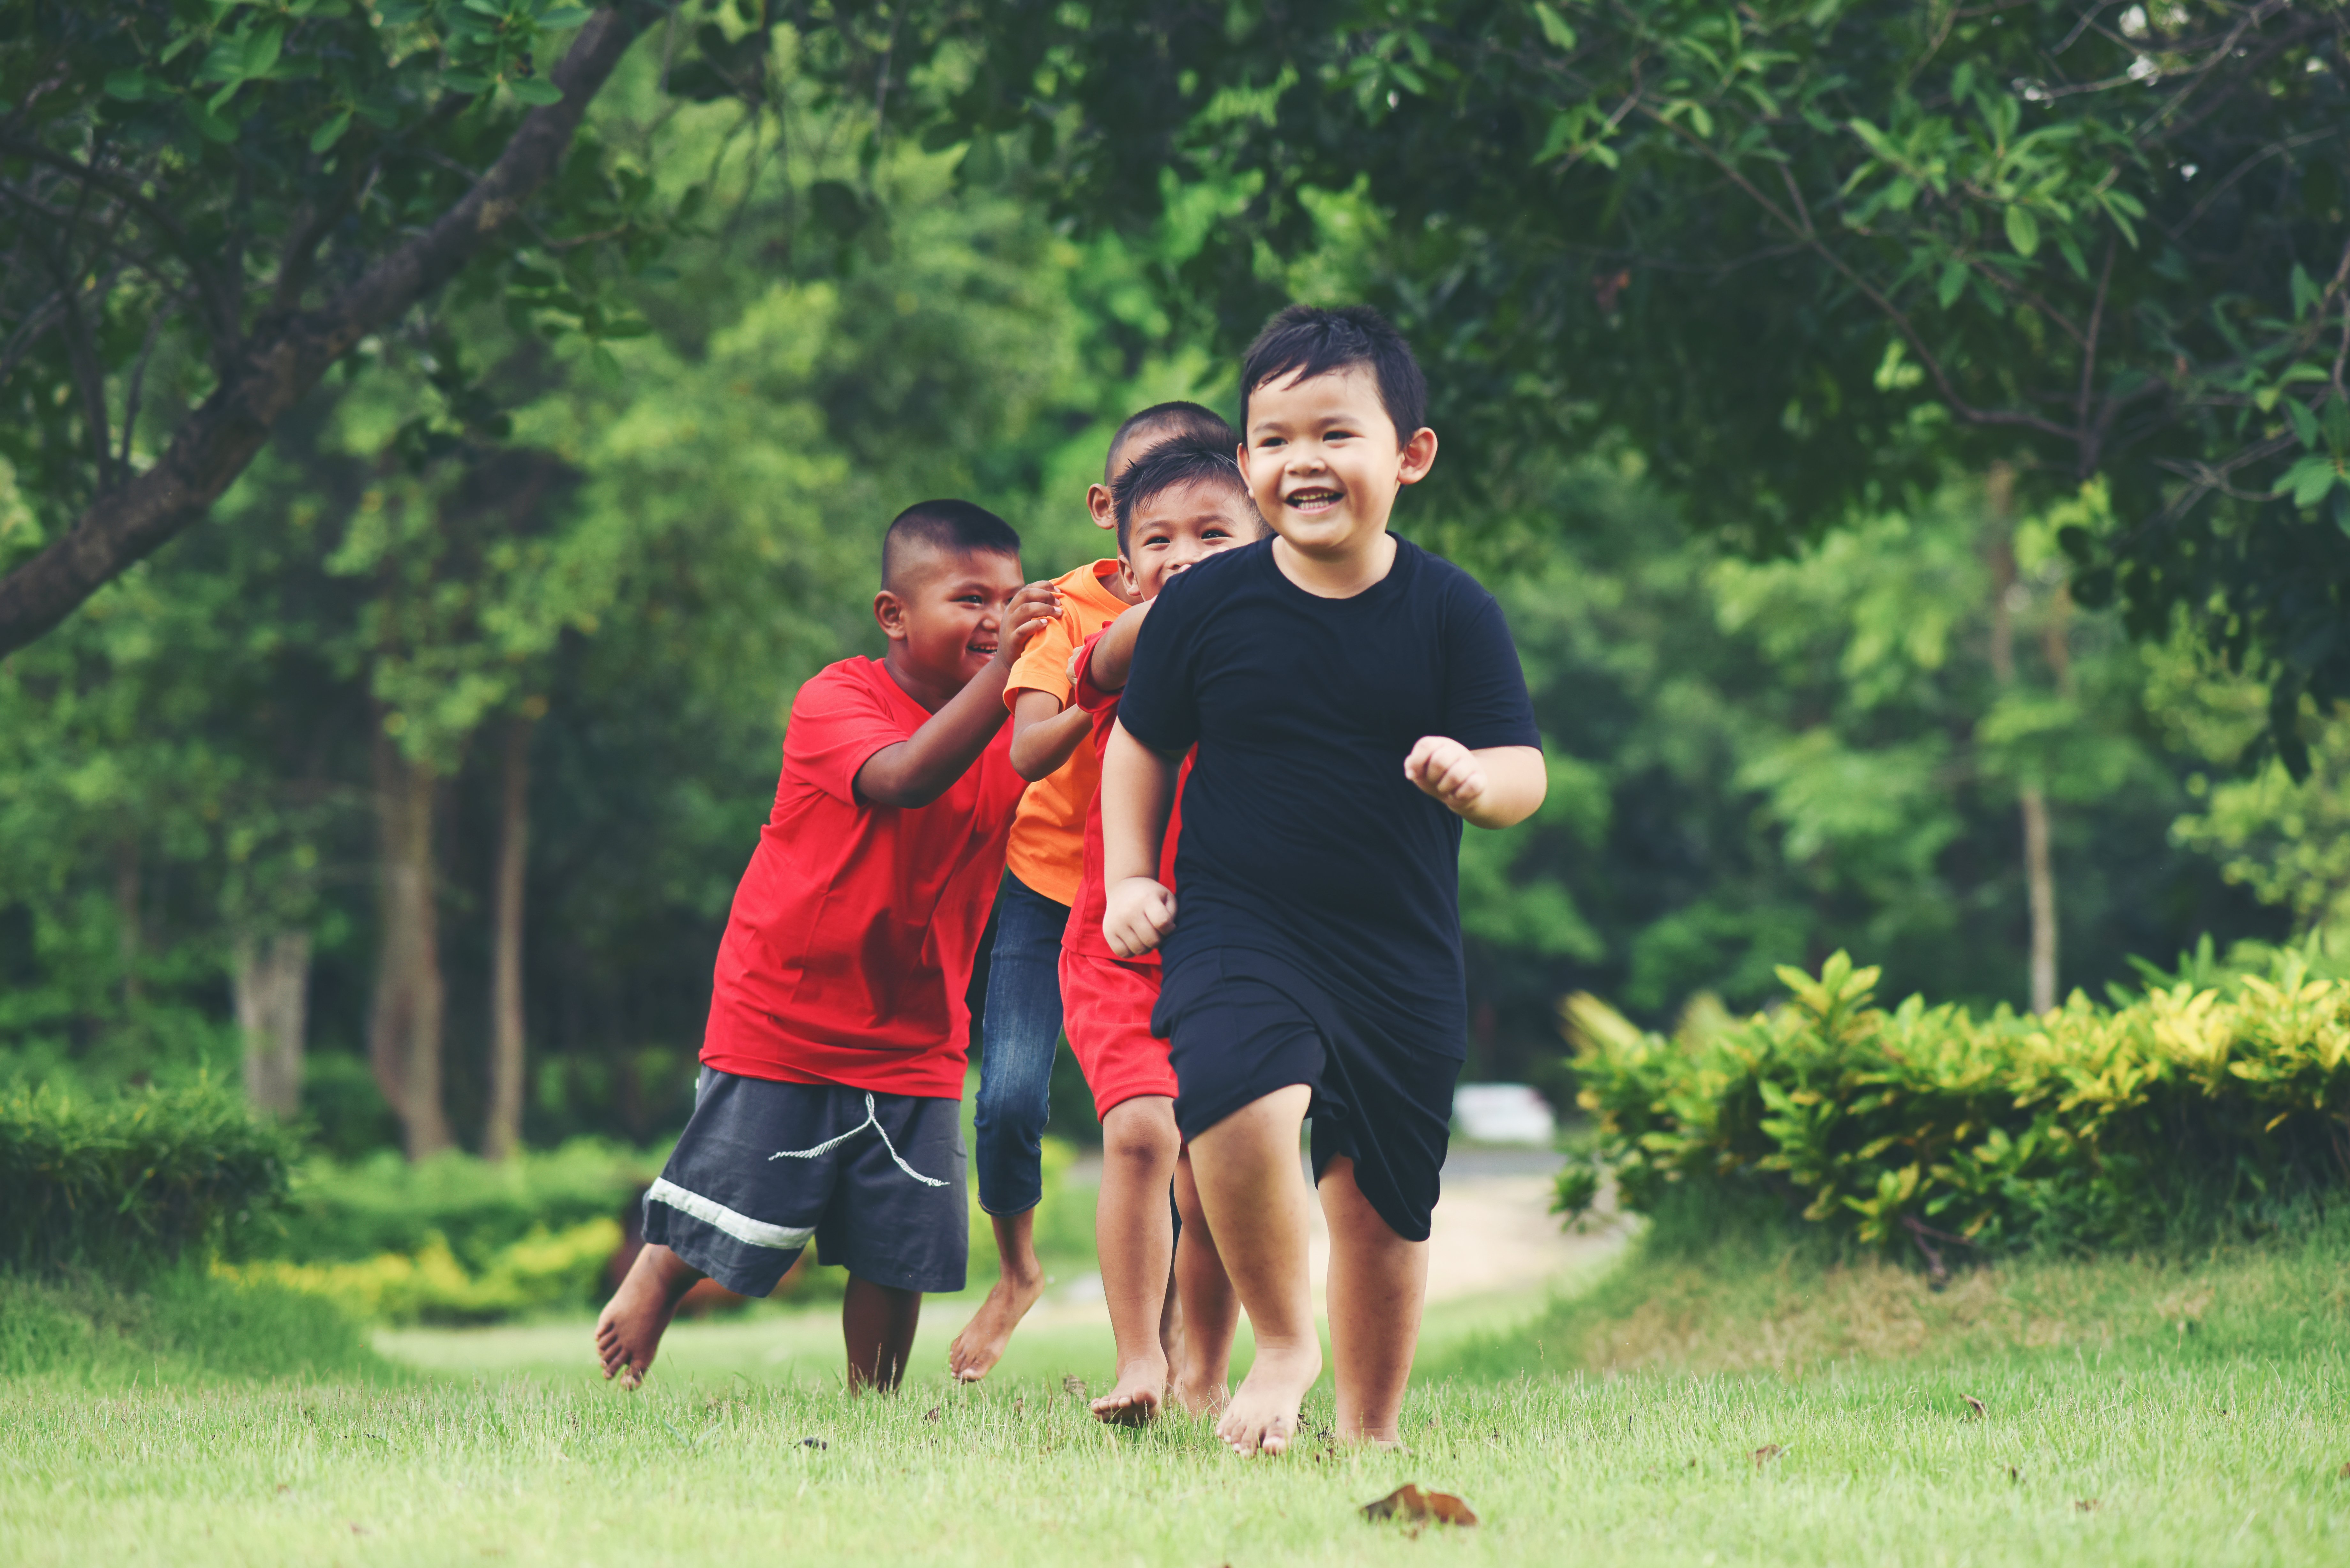 group-young-children-running-playing-park